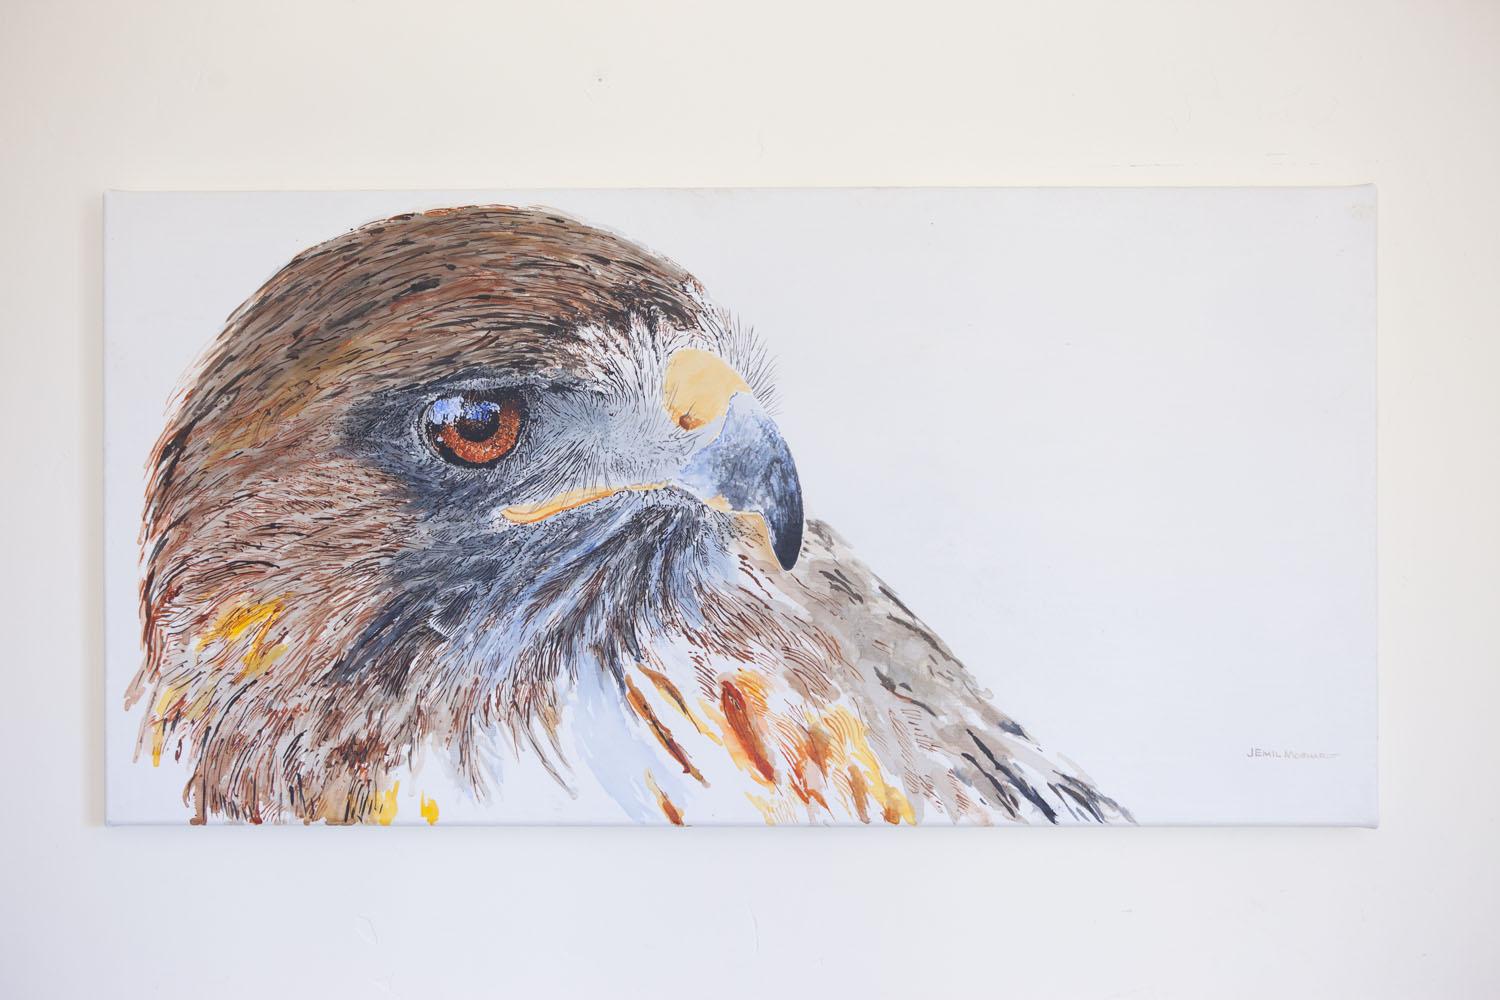 Ivan the Red-Tailed Hawk Cogitating - Painting by Emil Morhardt